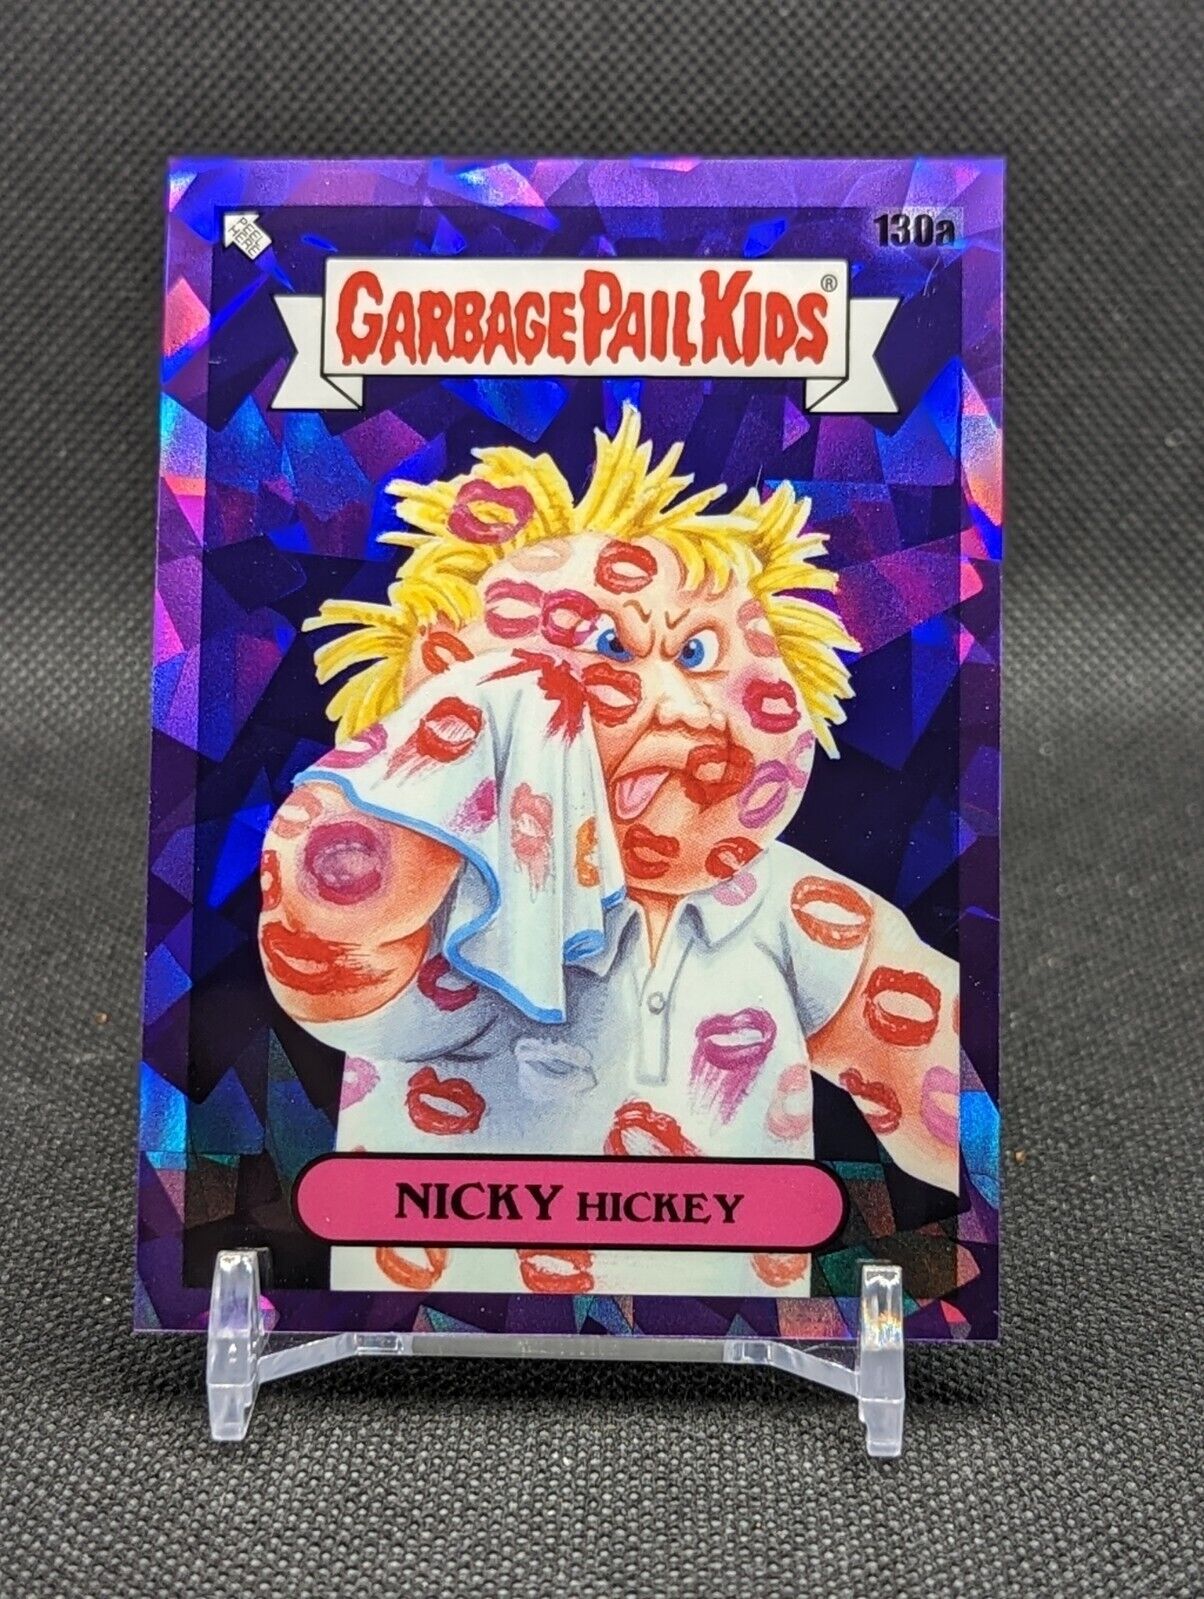 2021 Topps Garbage Pail Kids SAPPHIRE PURPLE PARALLEL 130a NICKY HICKEY  2/10 SP